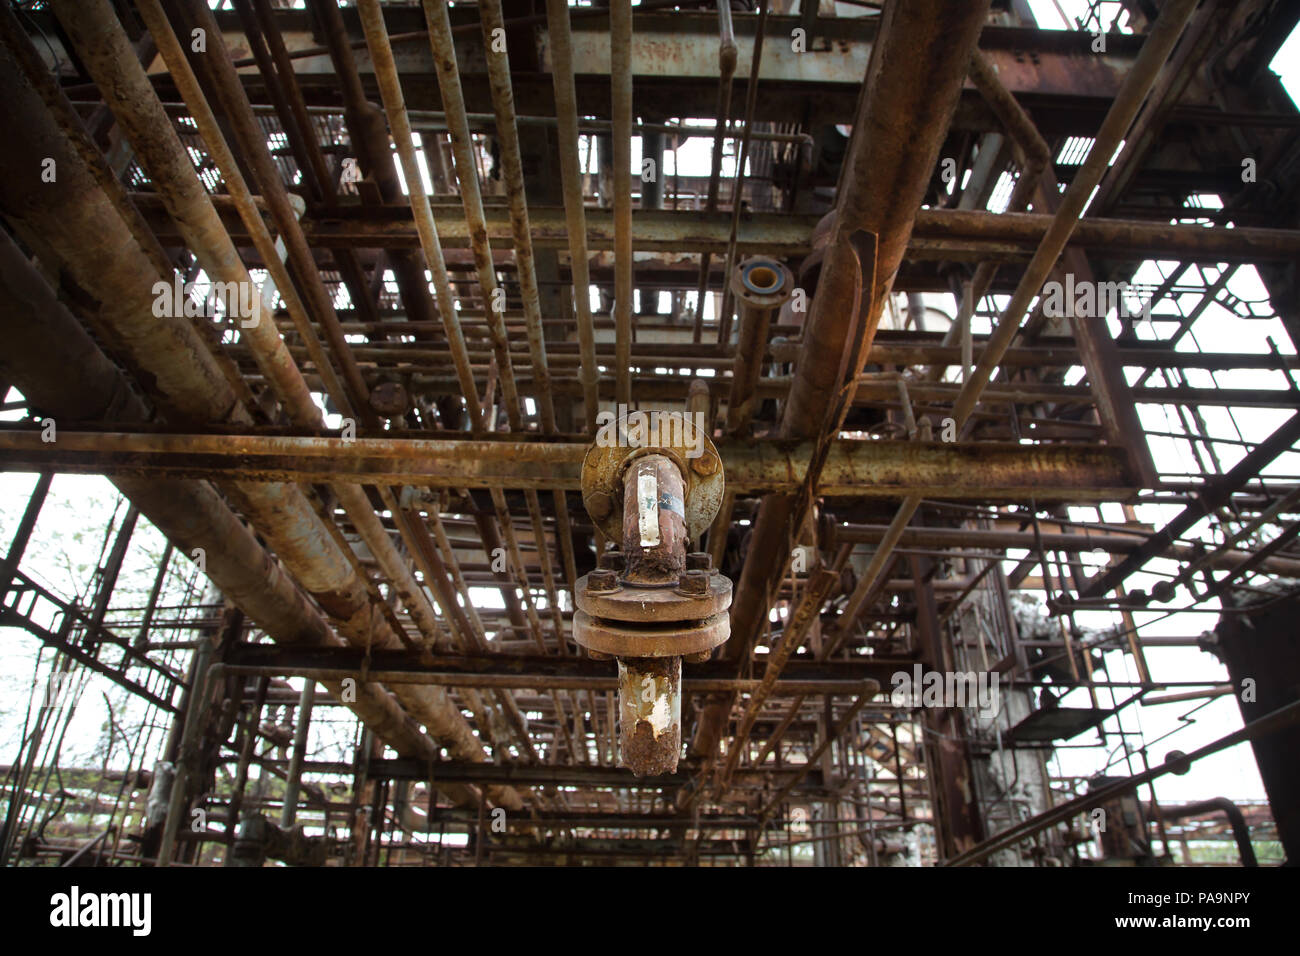 Metallic structure inside the abandoned former Union Carbide industrial complex, Bhopal, India Stock Photo